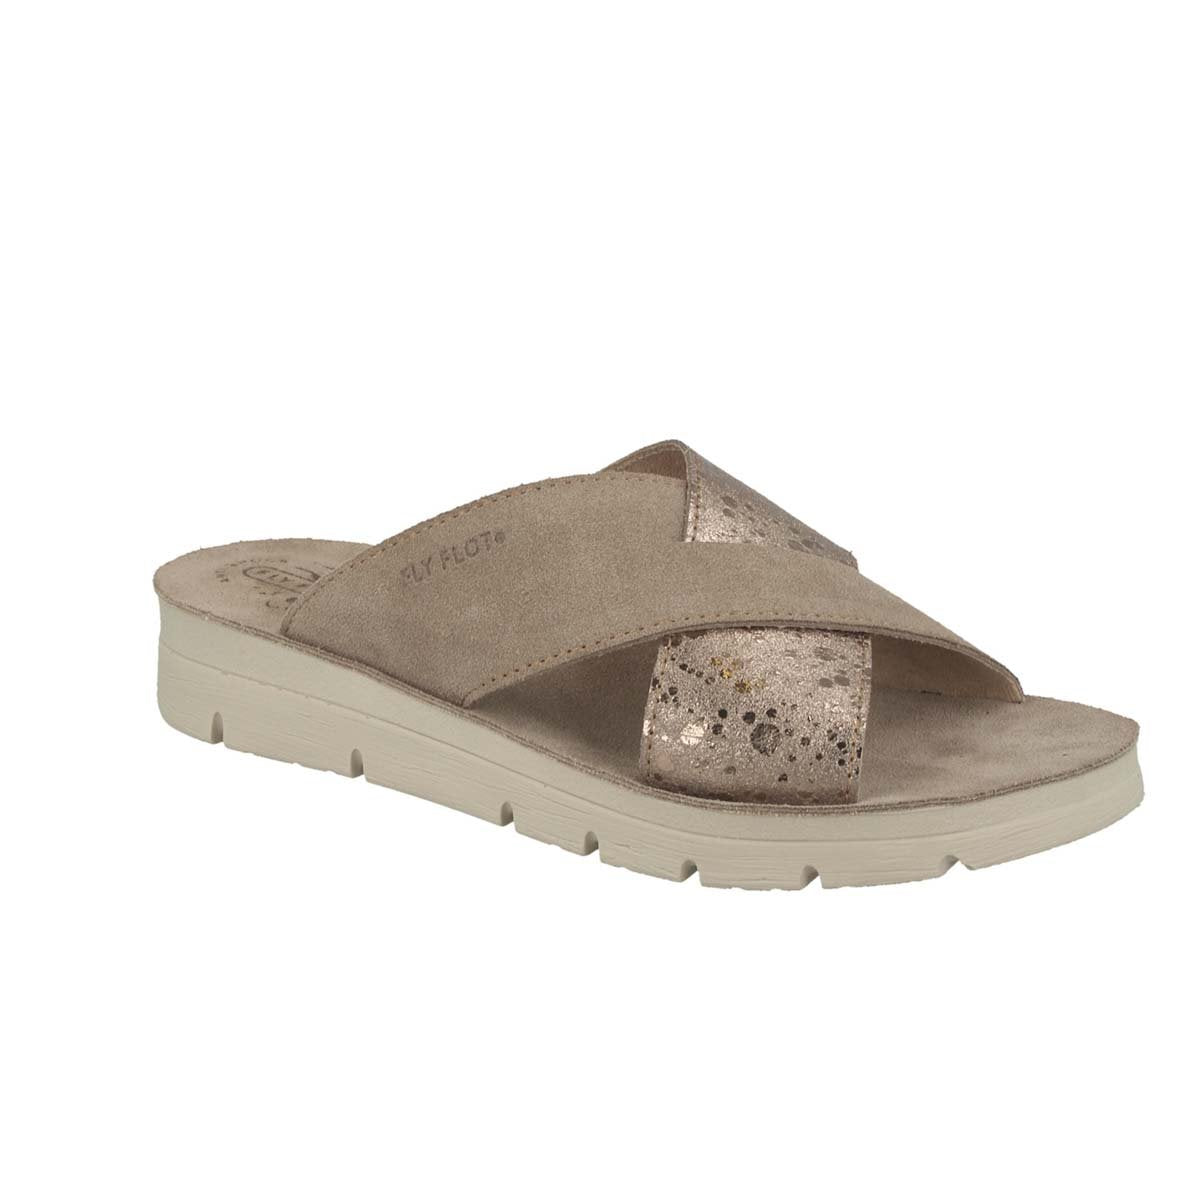 Photo of the Leather Woman Slipper Taupe (56f13is)